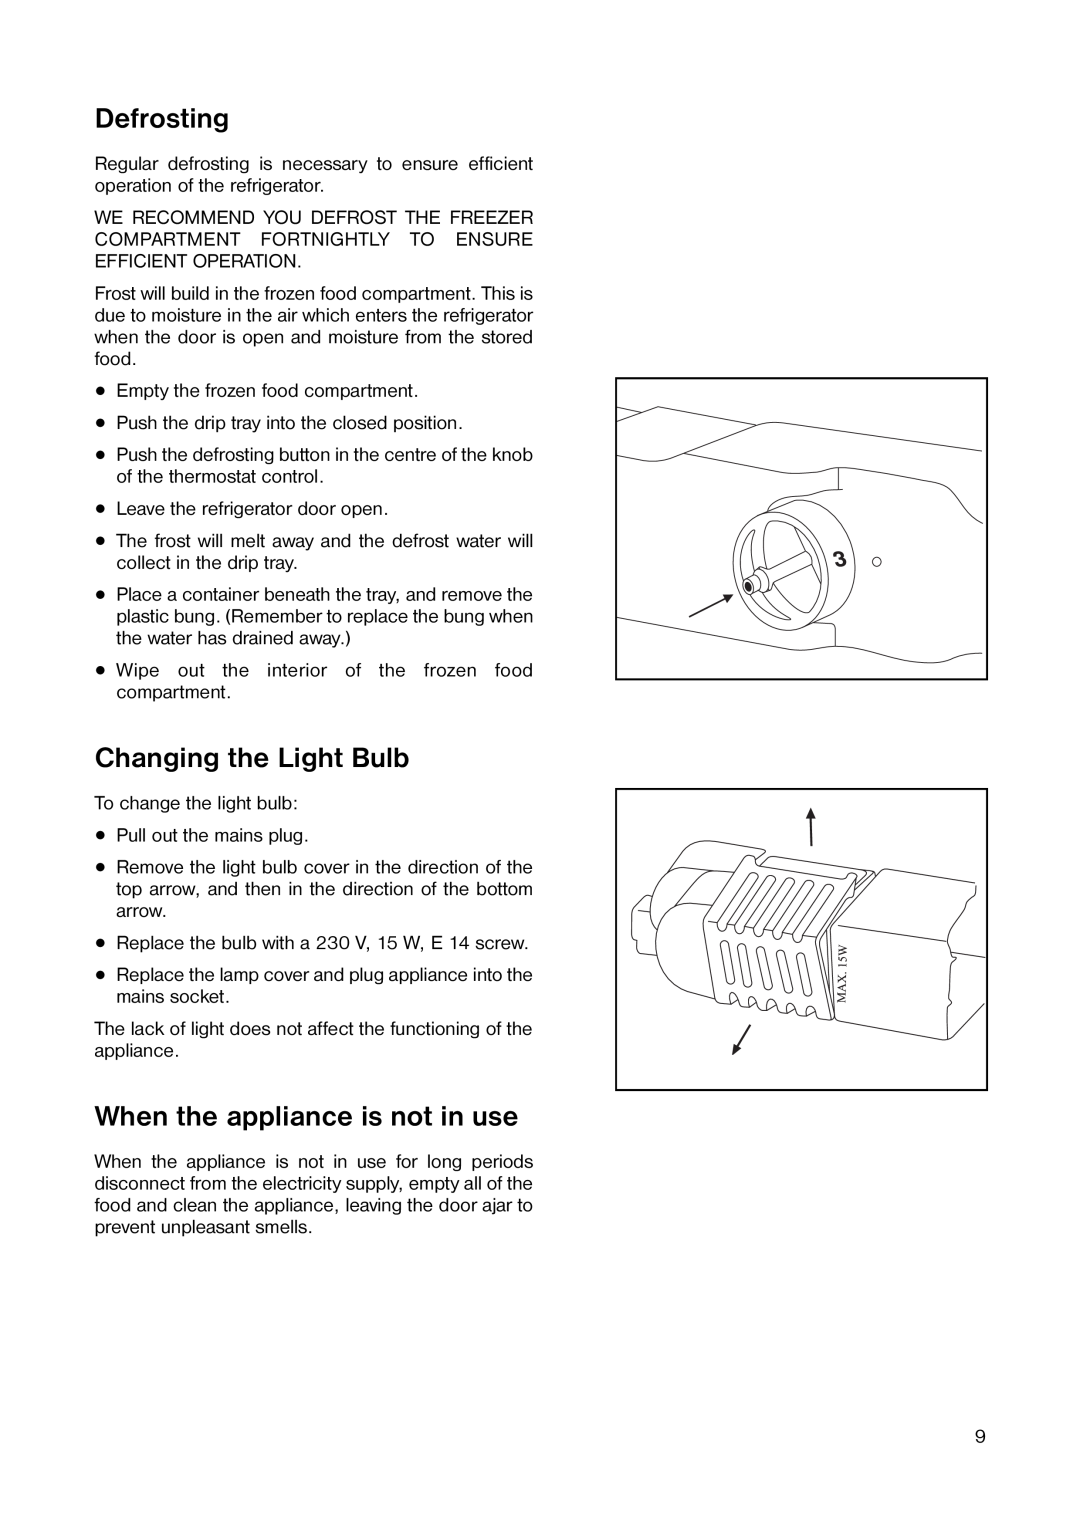 Tricity Bendix TB 56 R installation instructions Defrosting, Changing the Light Bulb, When the appliance is not in use 